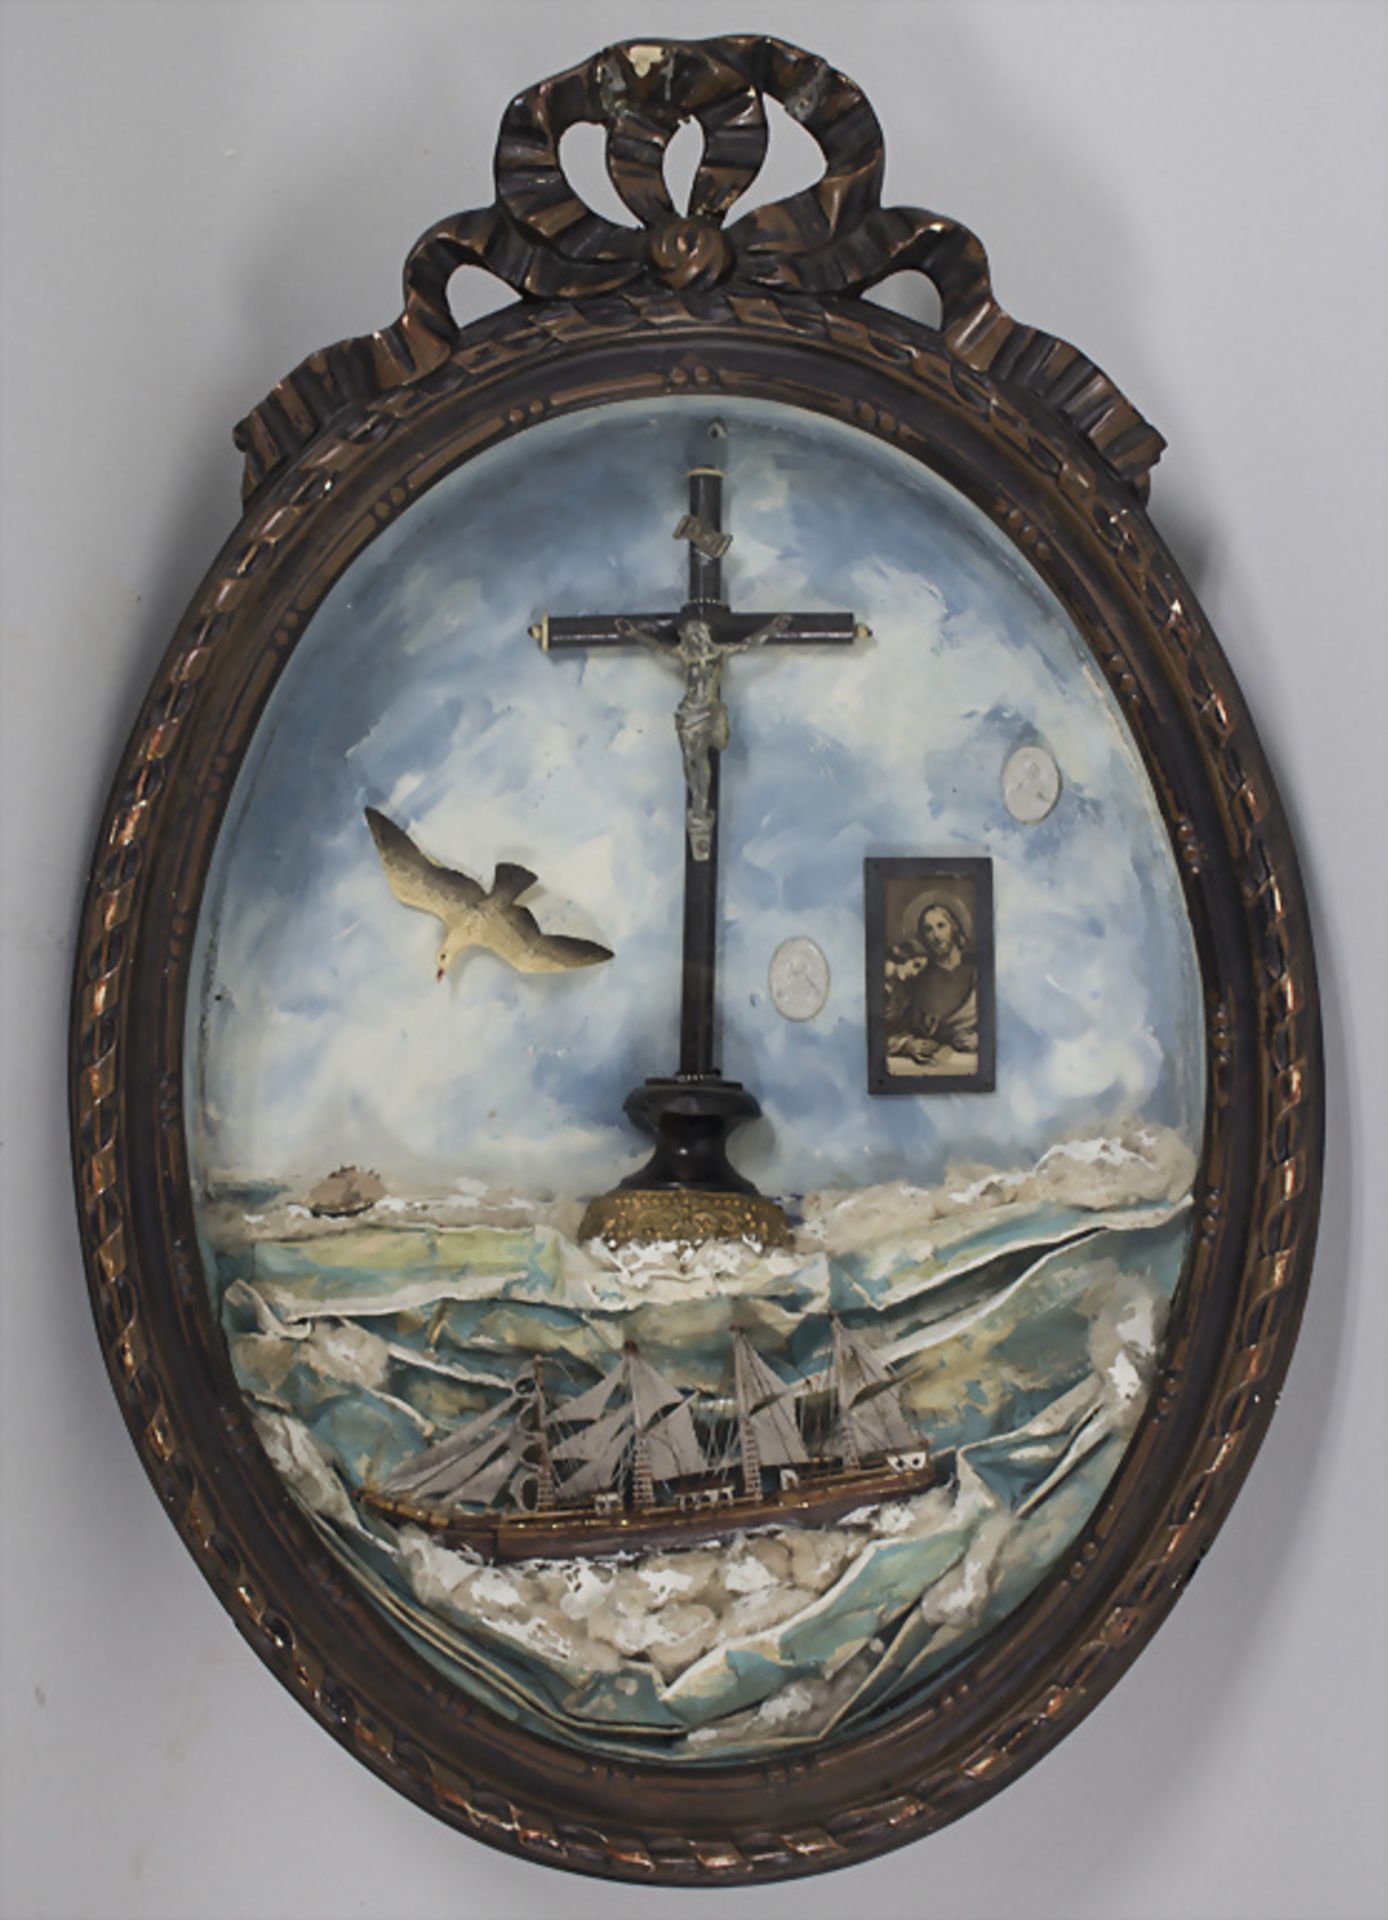 Maritimer Hausaltar mit Viermastsegler / A maritime house altar with a four-masted sailor, 19. Jh.